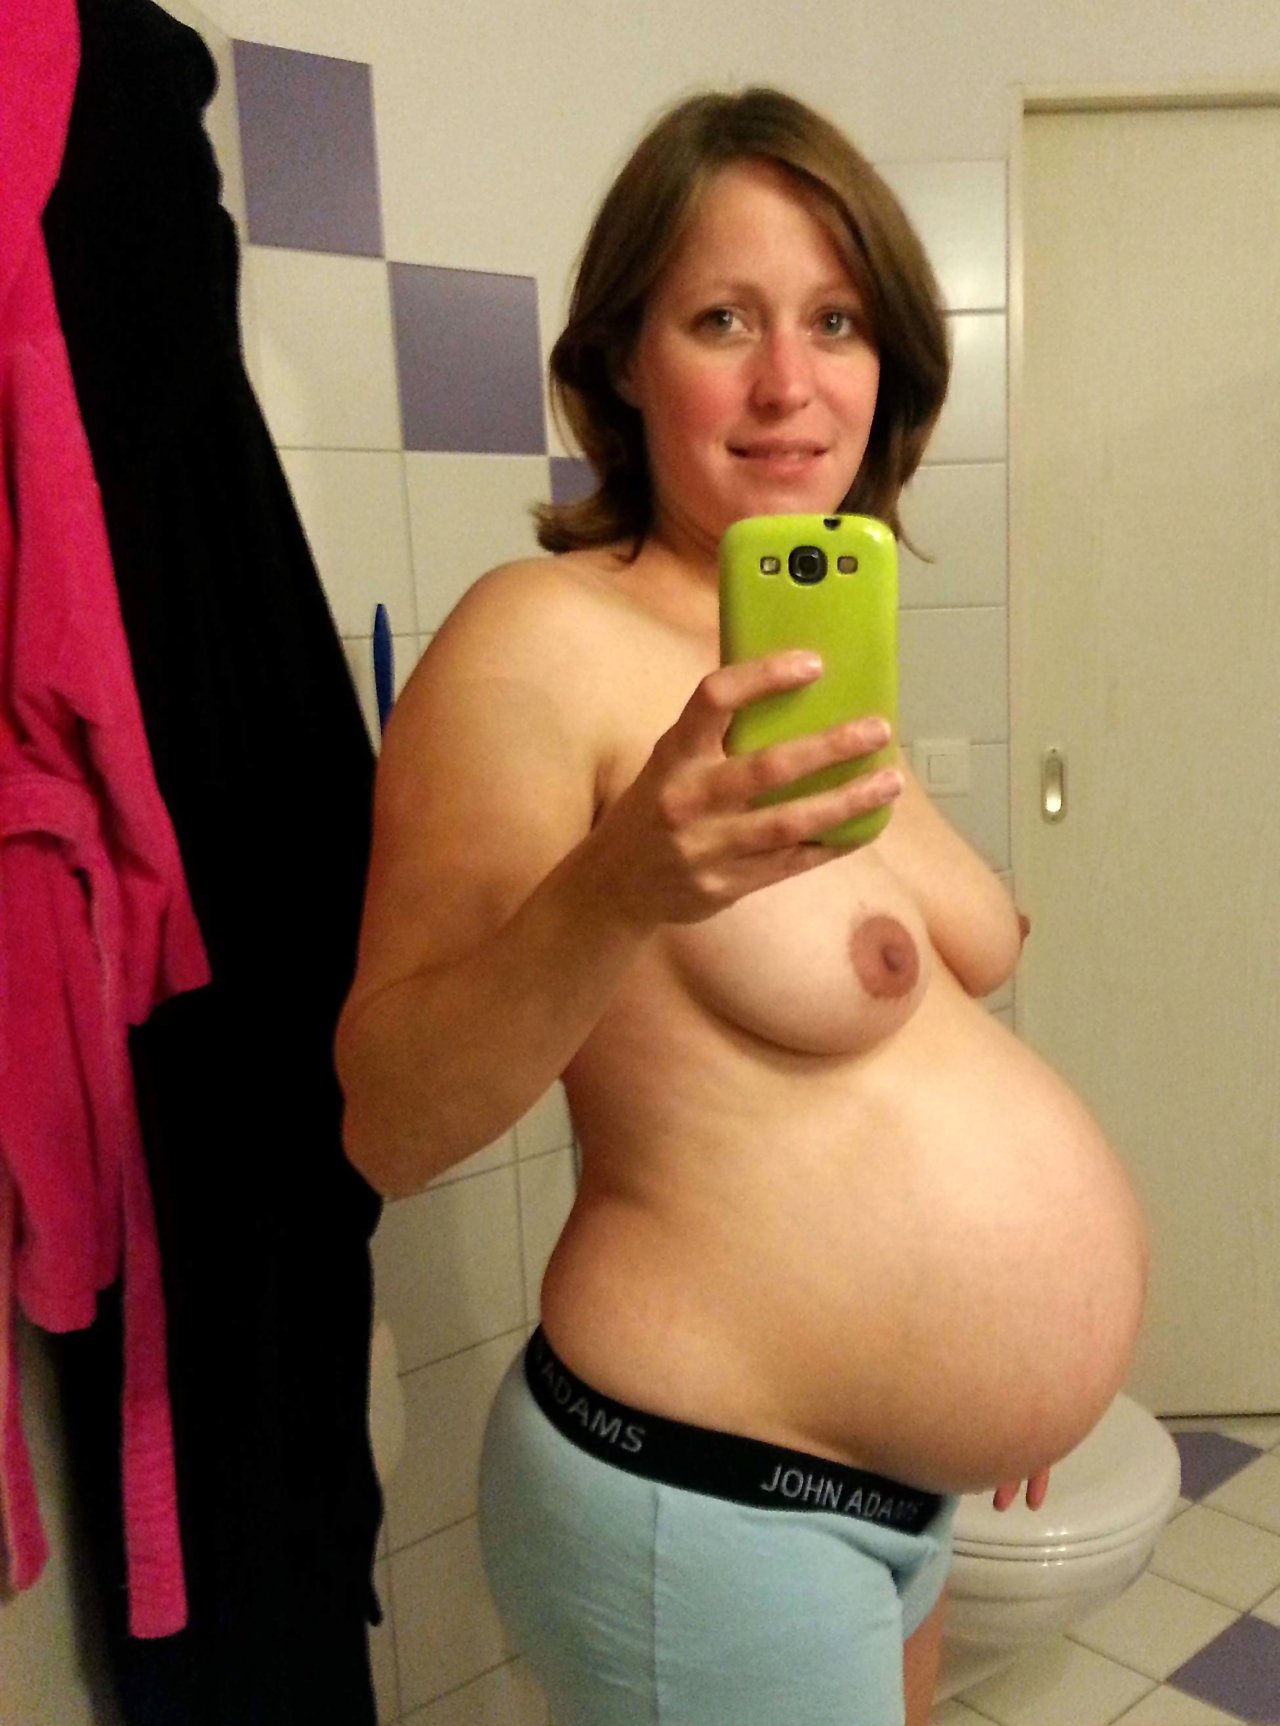 Pregnant women and girls show their naked bodies.